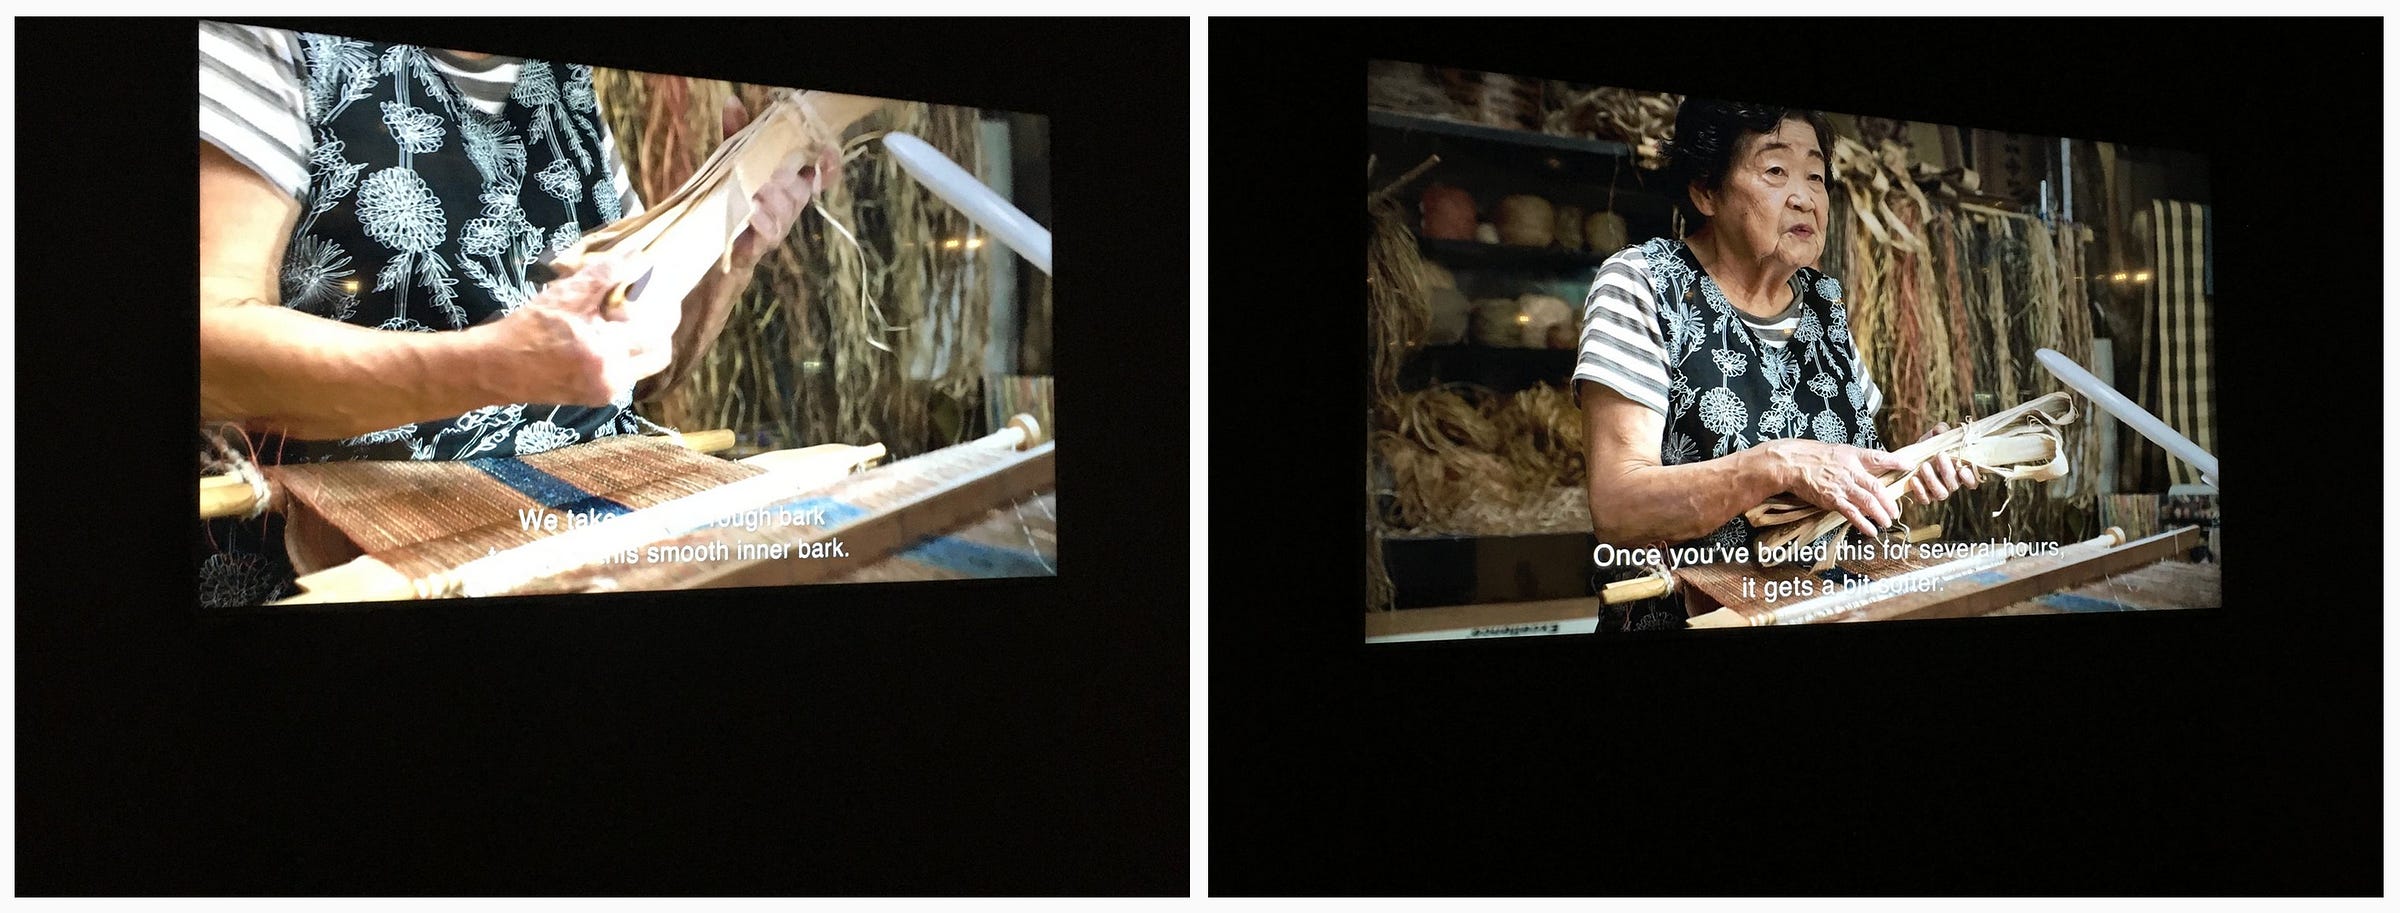 1-2. Video stills of attus weaver Kaizawa Yukiko explaining how to take the rough inner bark of a tree and process it so over time it becomes softer, before it can be stripped further for yarn.